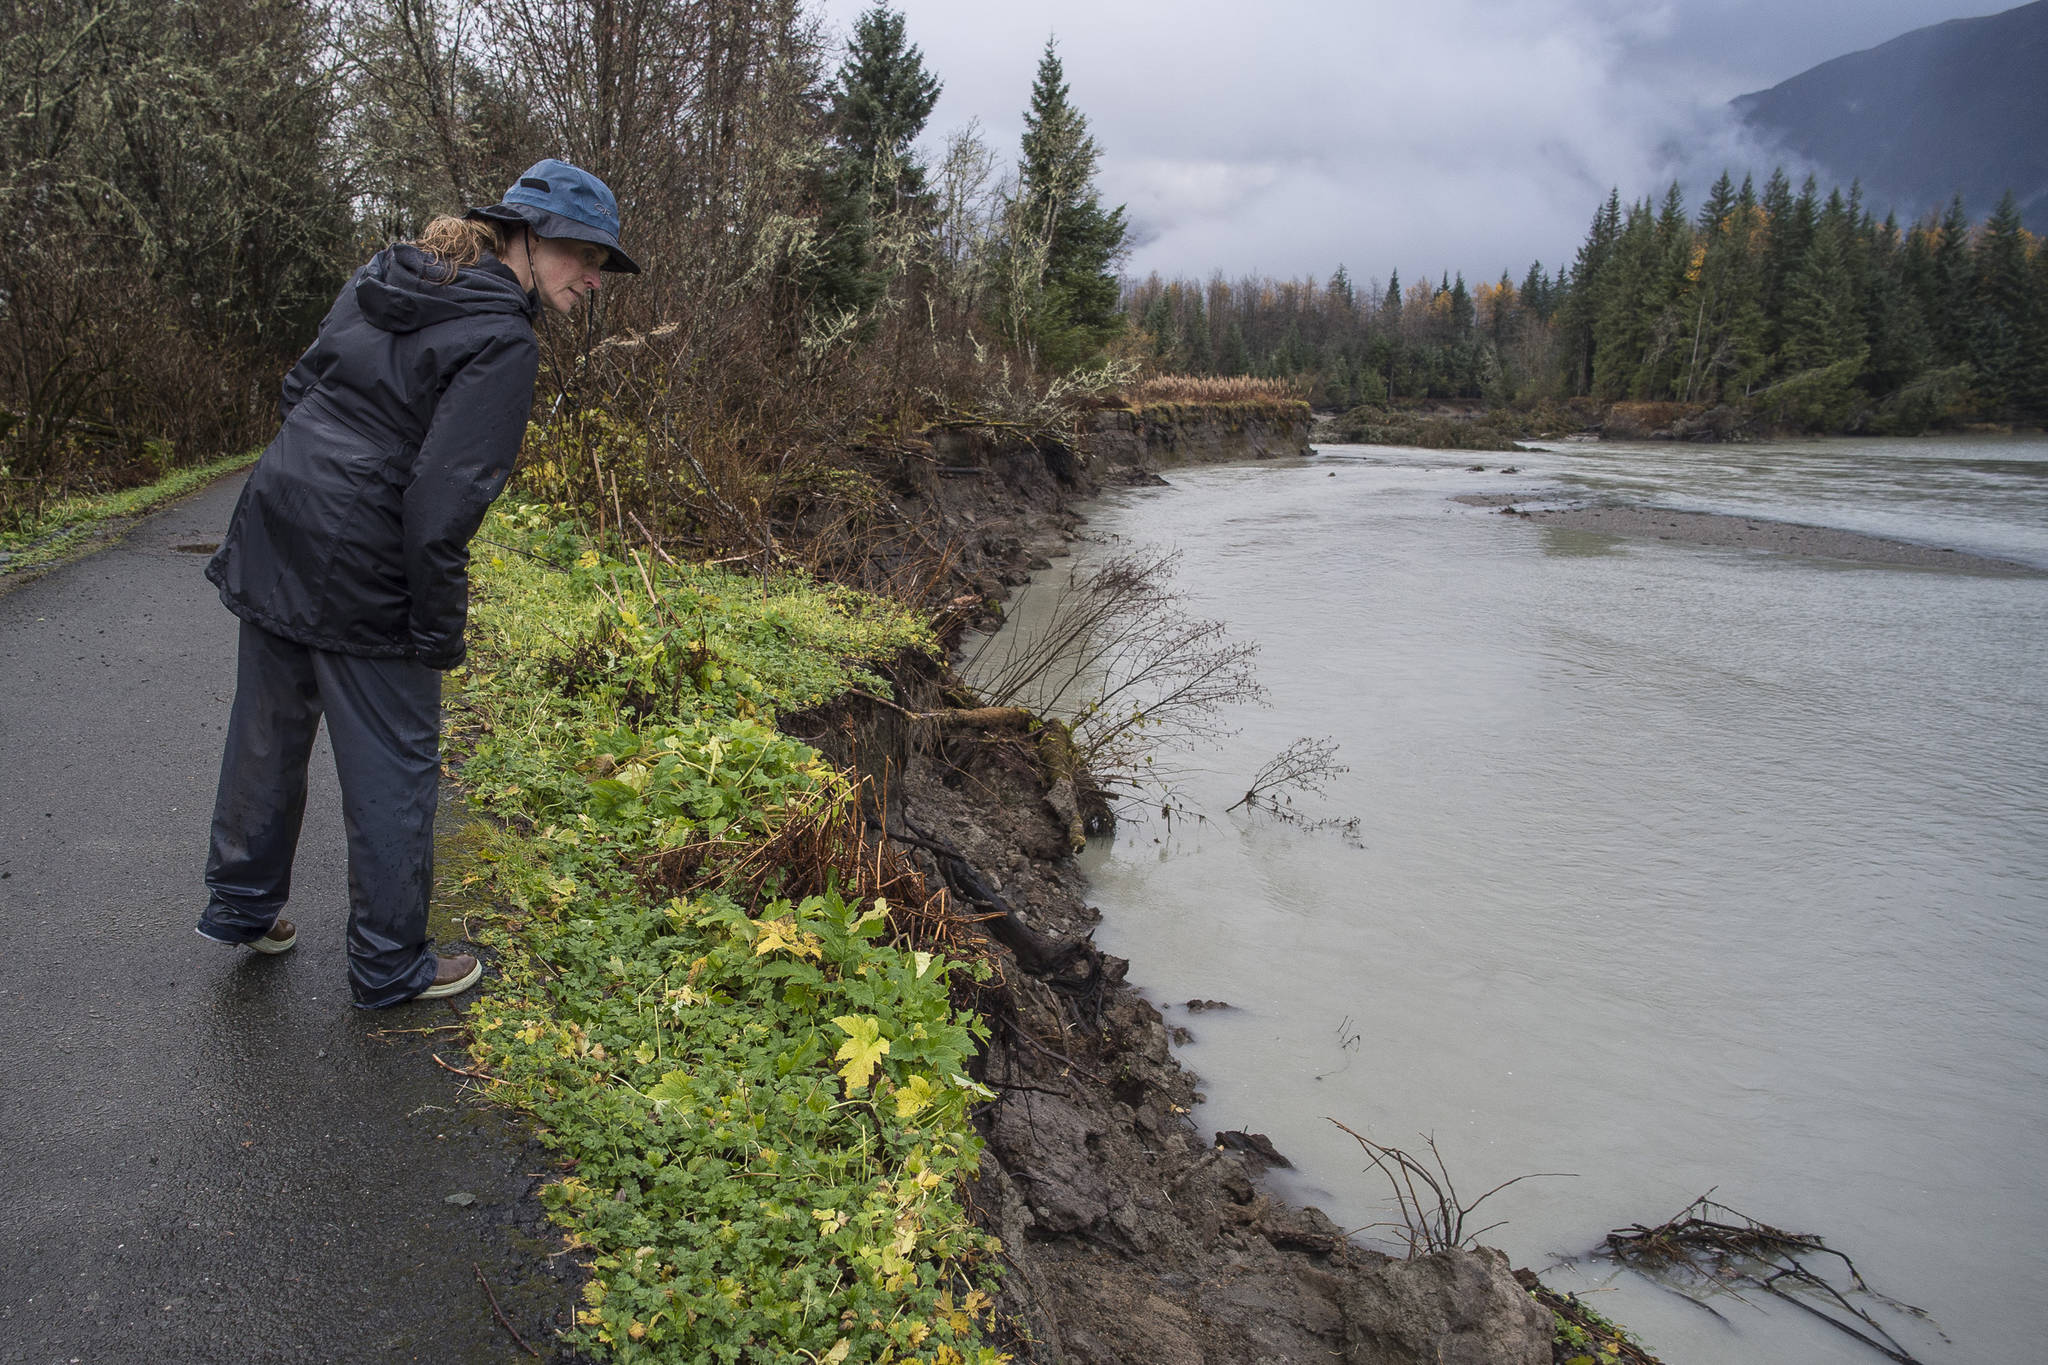 Sonia Nagorski, assistant professor of Geology Arts and Sciences at the University of Alaska Southeast, investigates erosion below the broken oxbow along the Mendenhall River on Wednesday, Oct. 17, 2018. The river cut through the meander bend just north of the Brotherhood Bridge this summer. (Michael Penn | Juneau Empire)